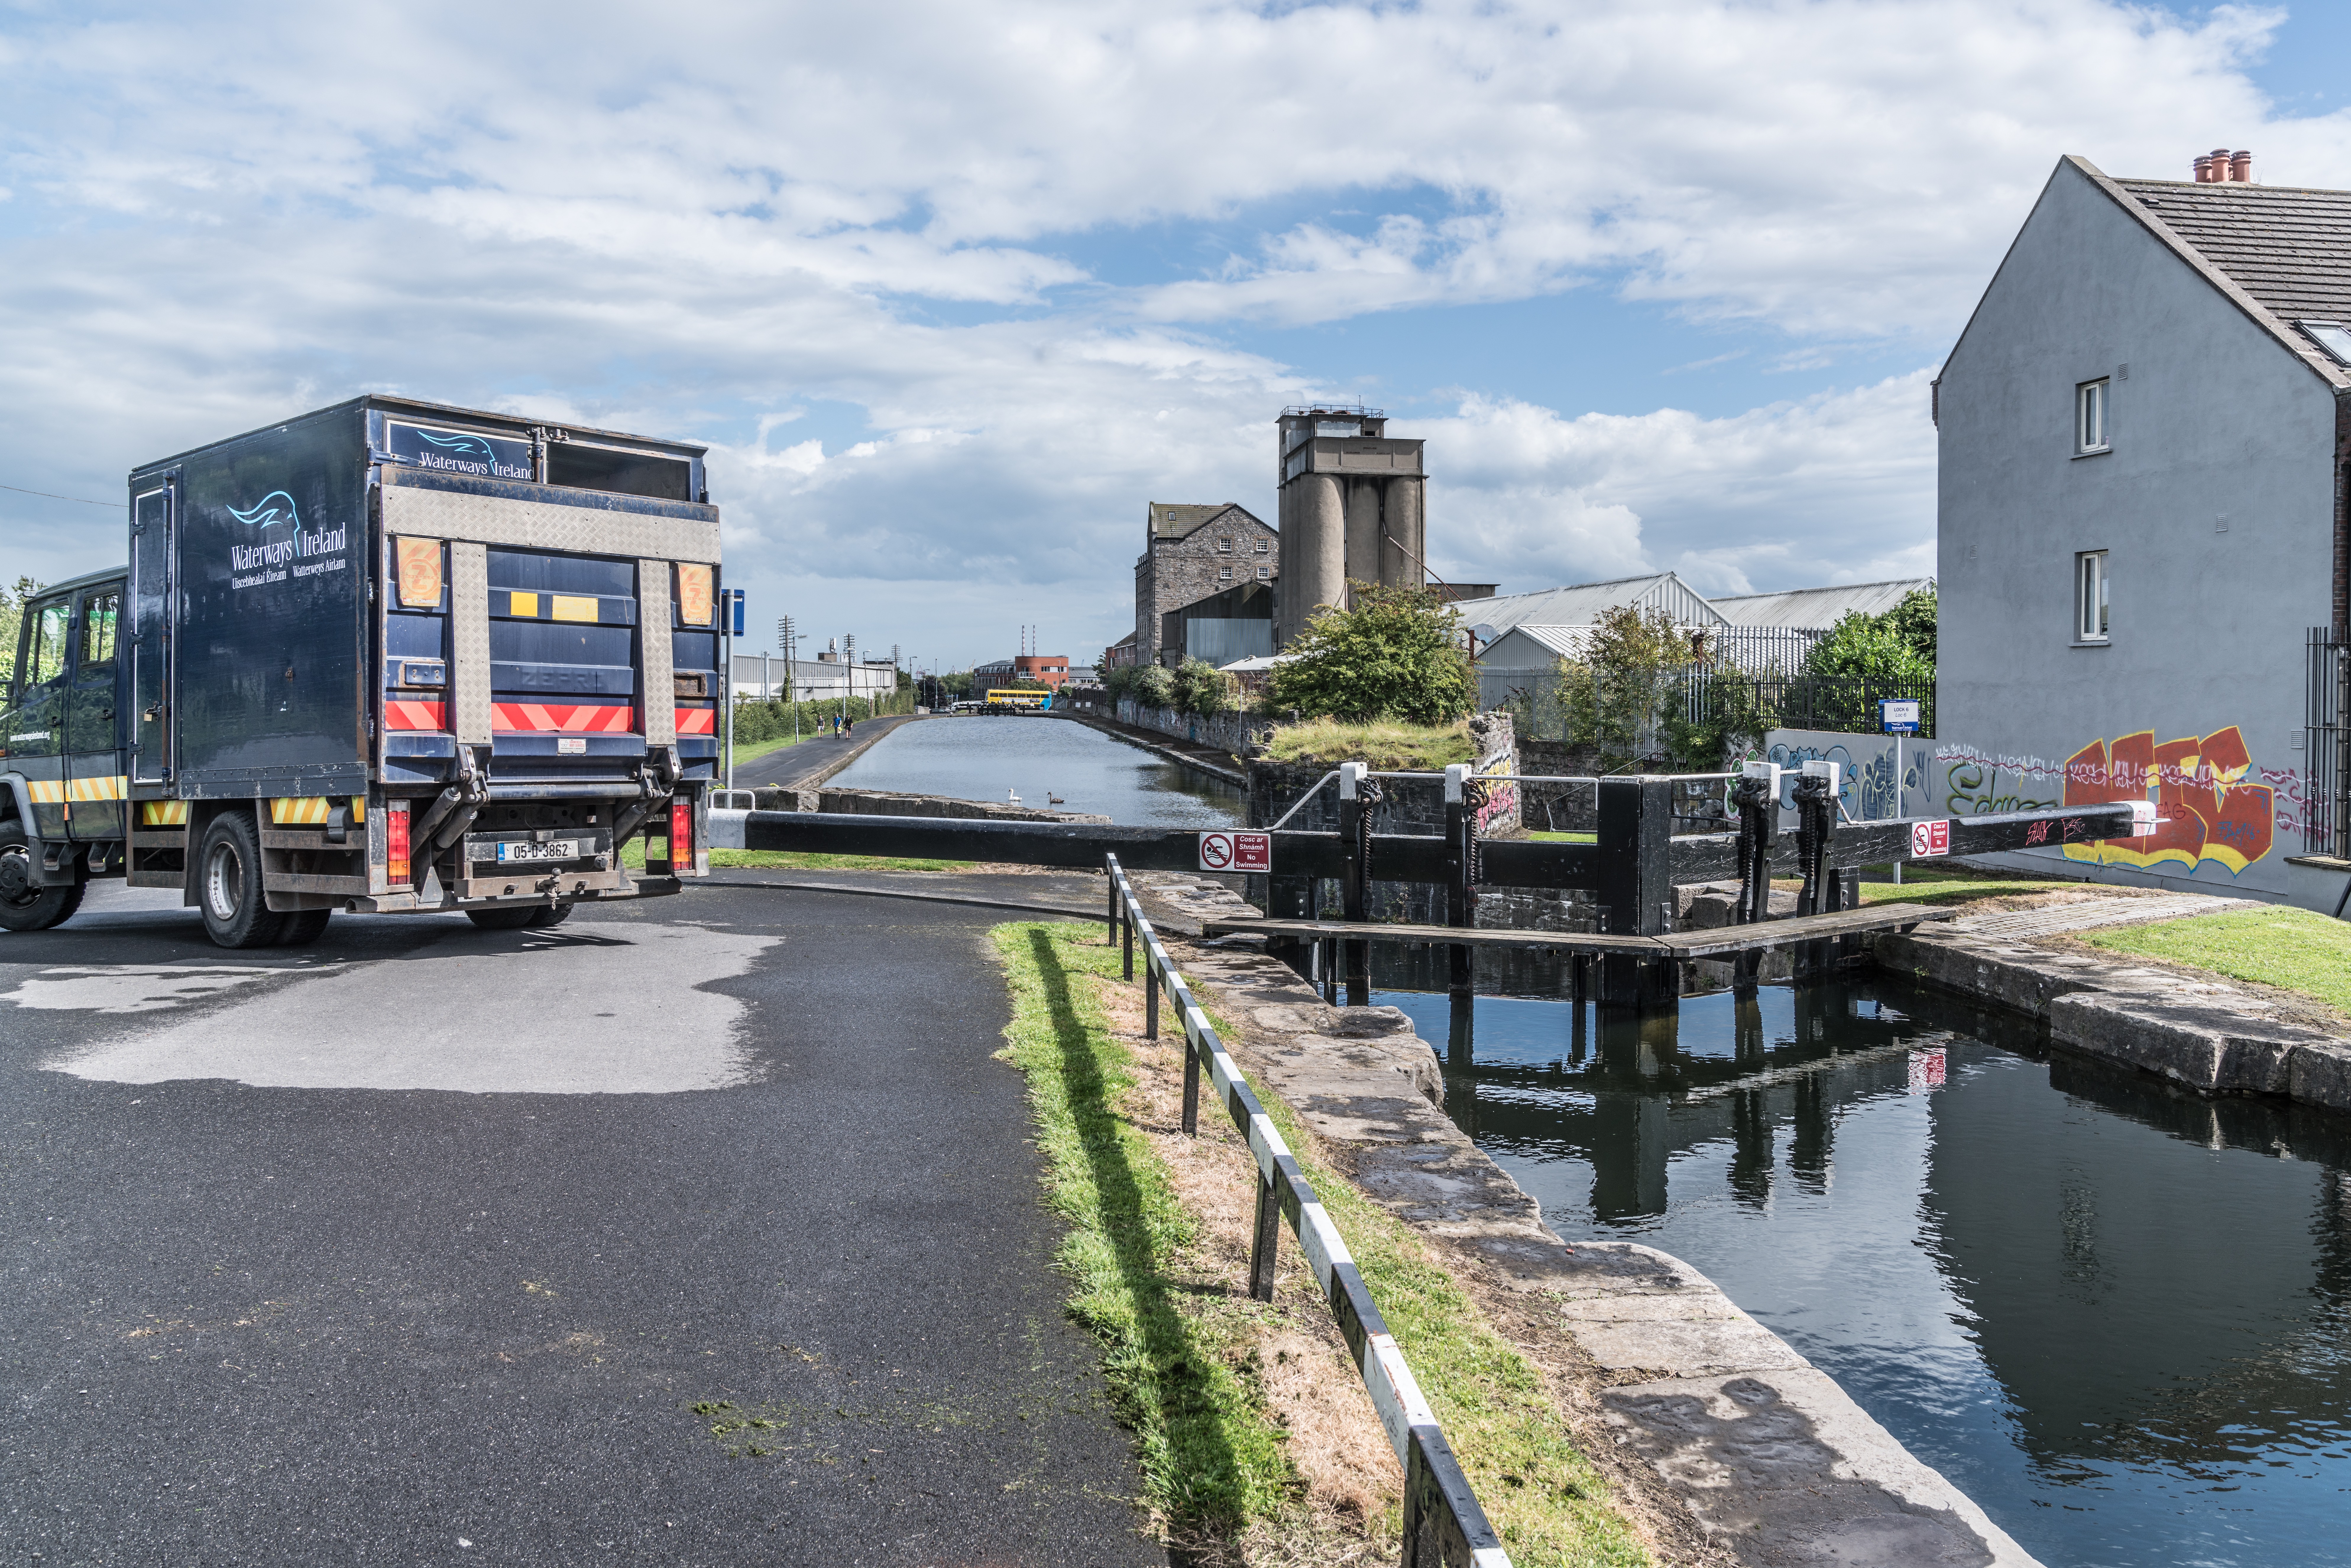  ROYAL CANAL - CABRA AREA 022 